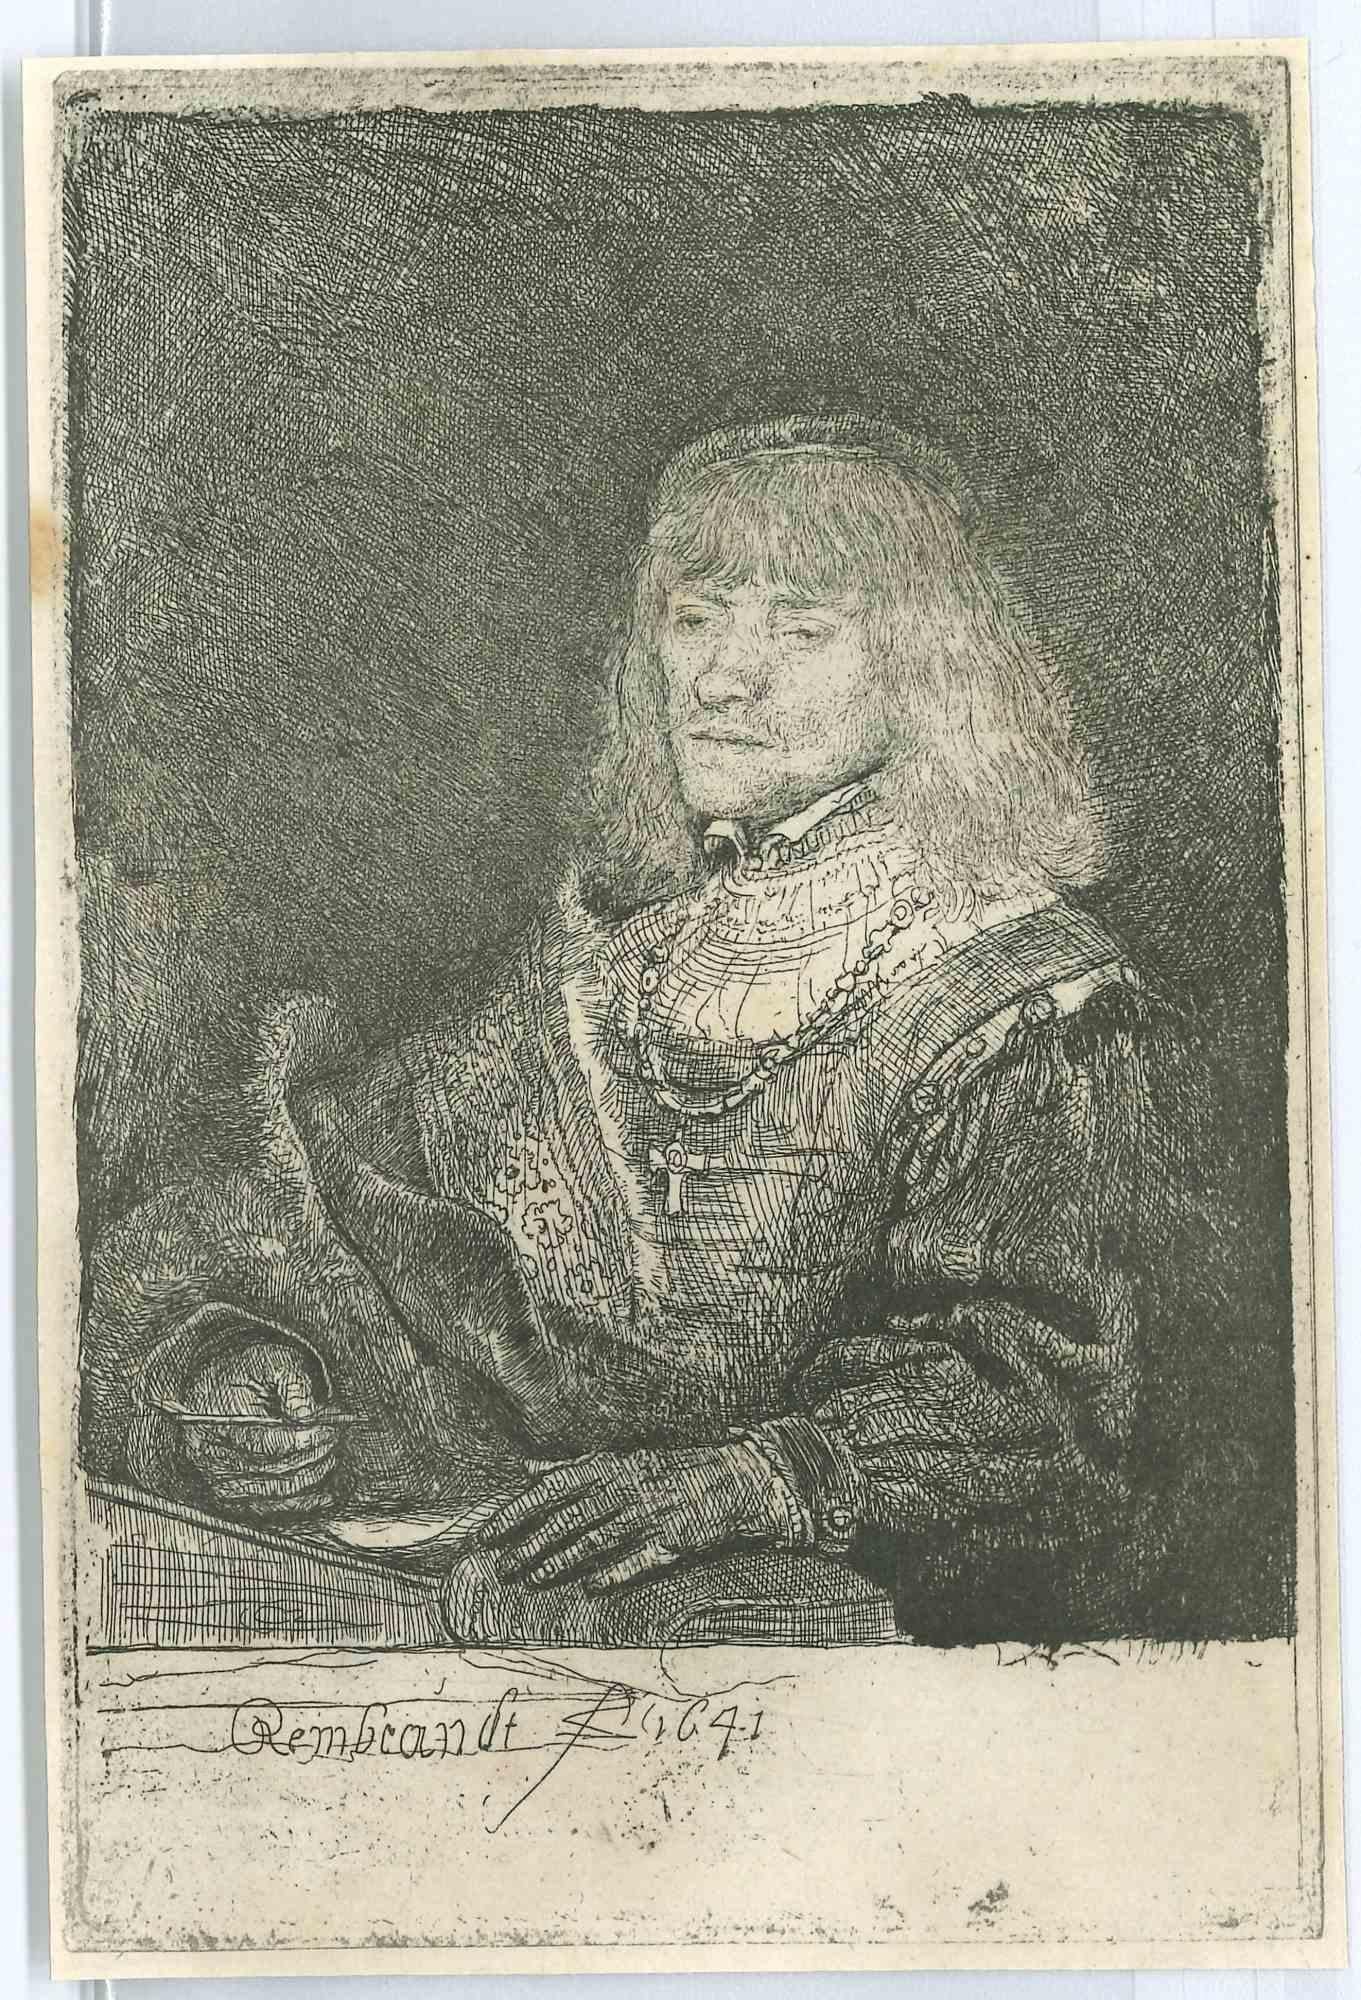 Charles Amand Durand Figurative Print - Man at Desk, Wearing Cross - Engraving after Rembrandt - 19th Century